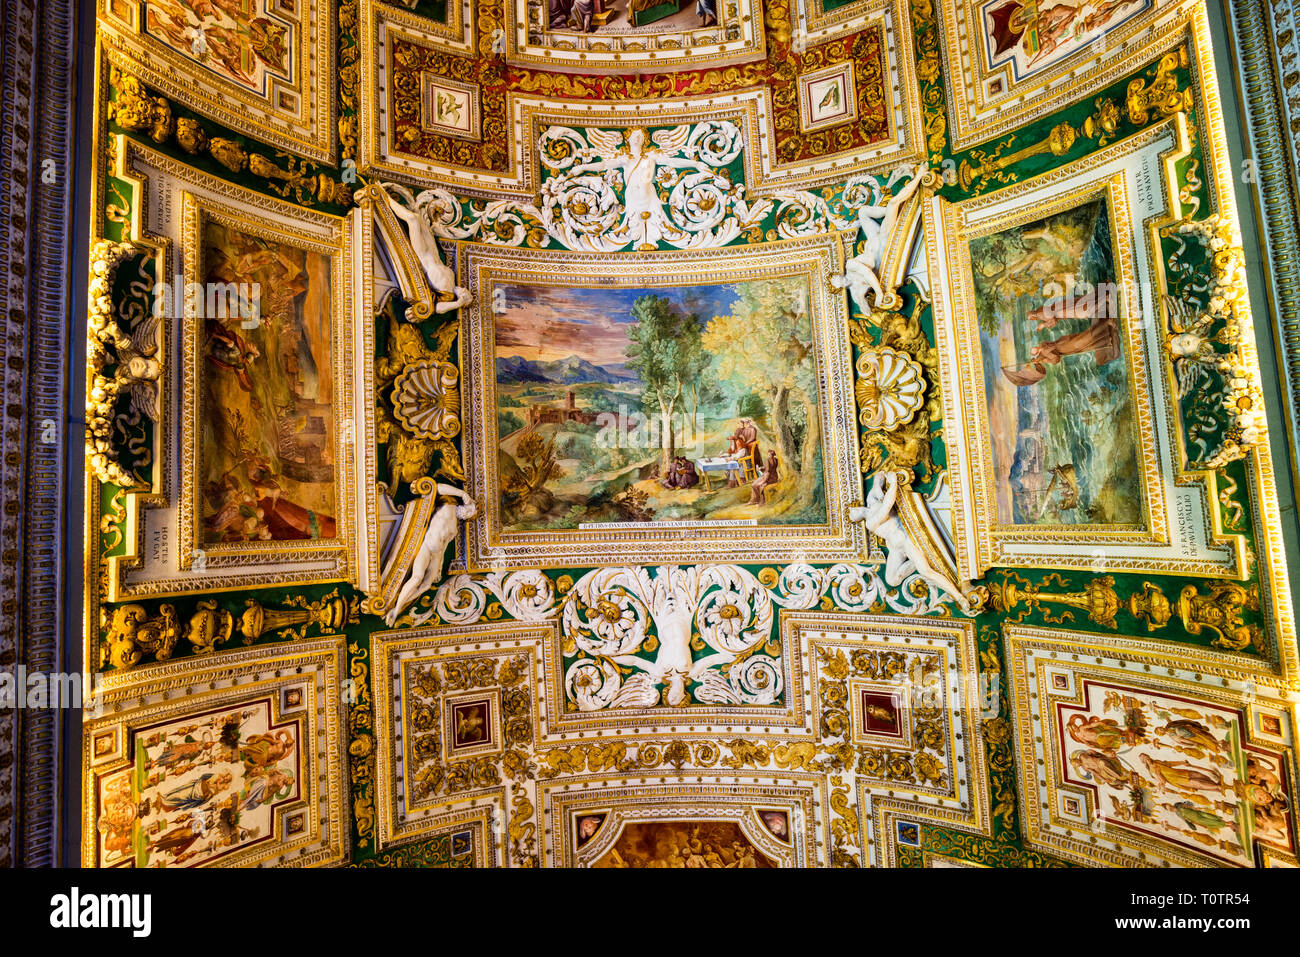 Painted vaulted ceiling of The Gallery of Maps in the Vatican Museums, Vatican City, Rome, Italy. Stock Photo